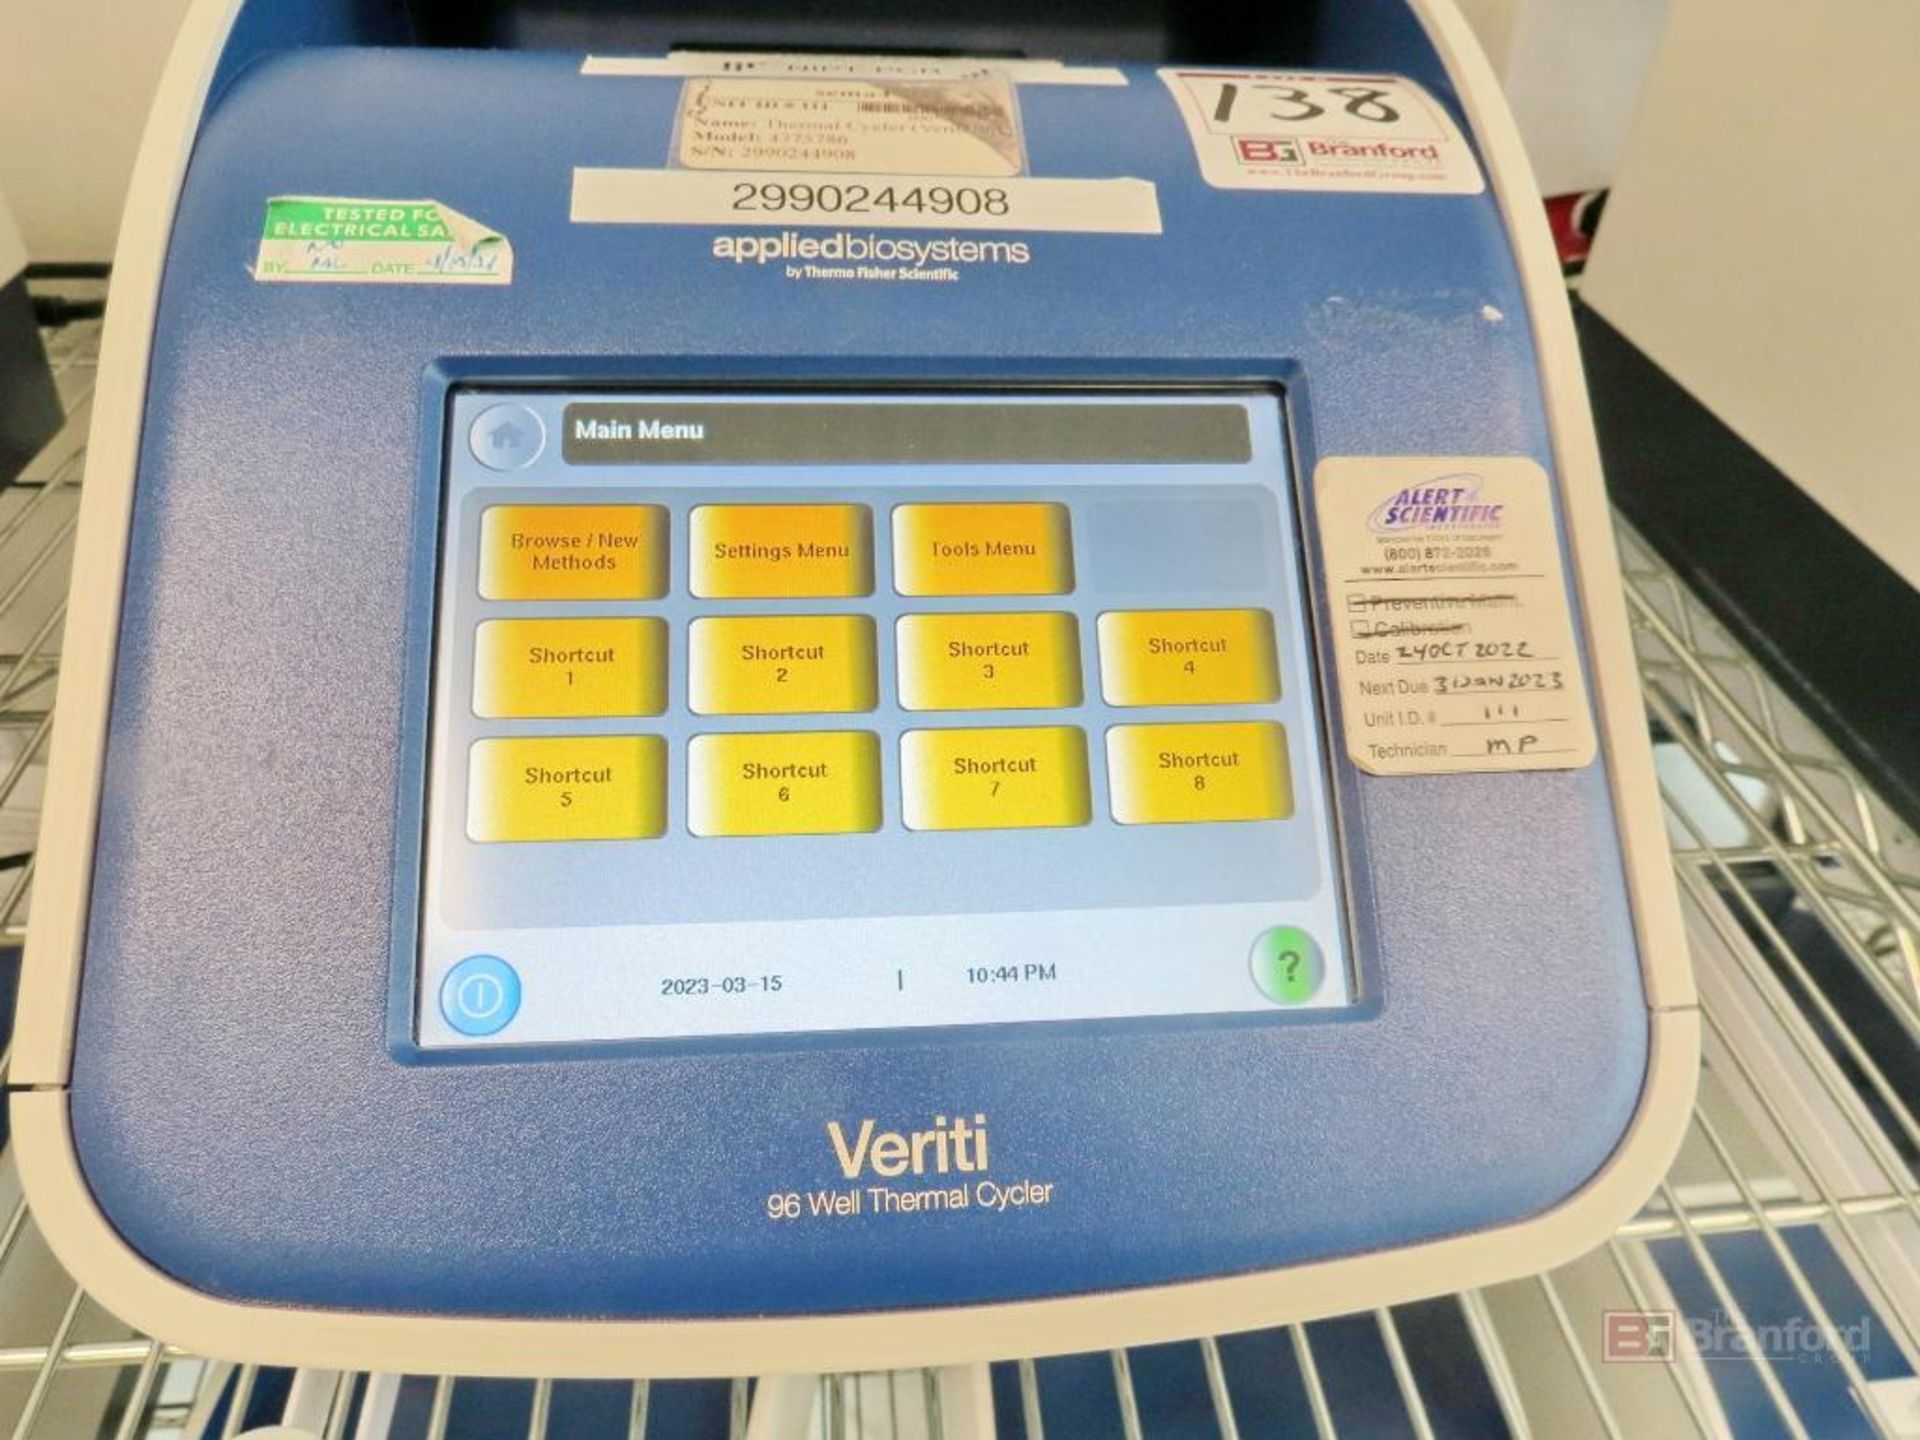 Thermo Applied Biosystems Veriti 96-Well Thermal Cycler - Image 3 of 3